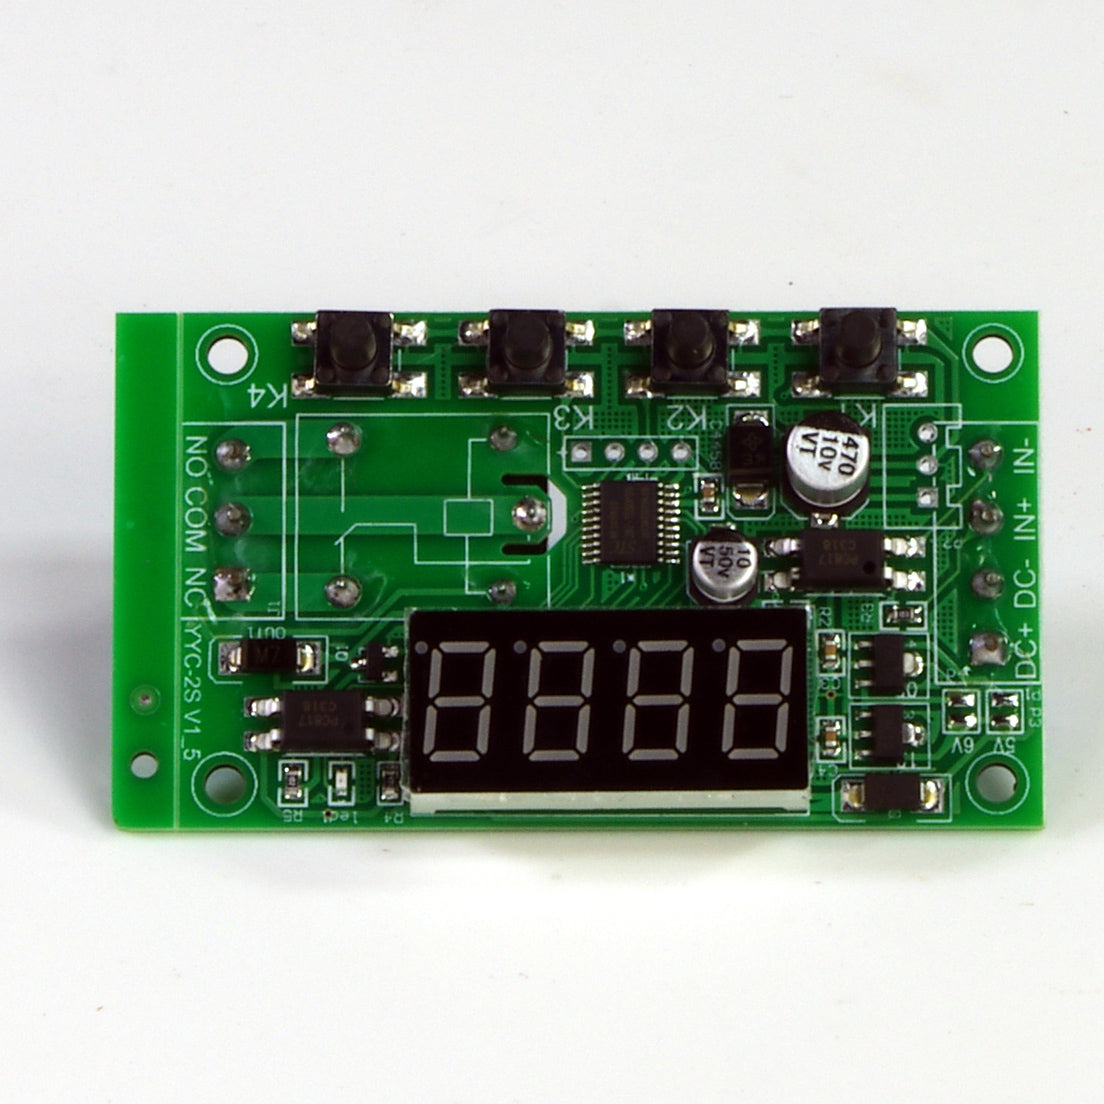 Rubber Roller Delay Control PCB - DTF 24" Shaker